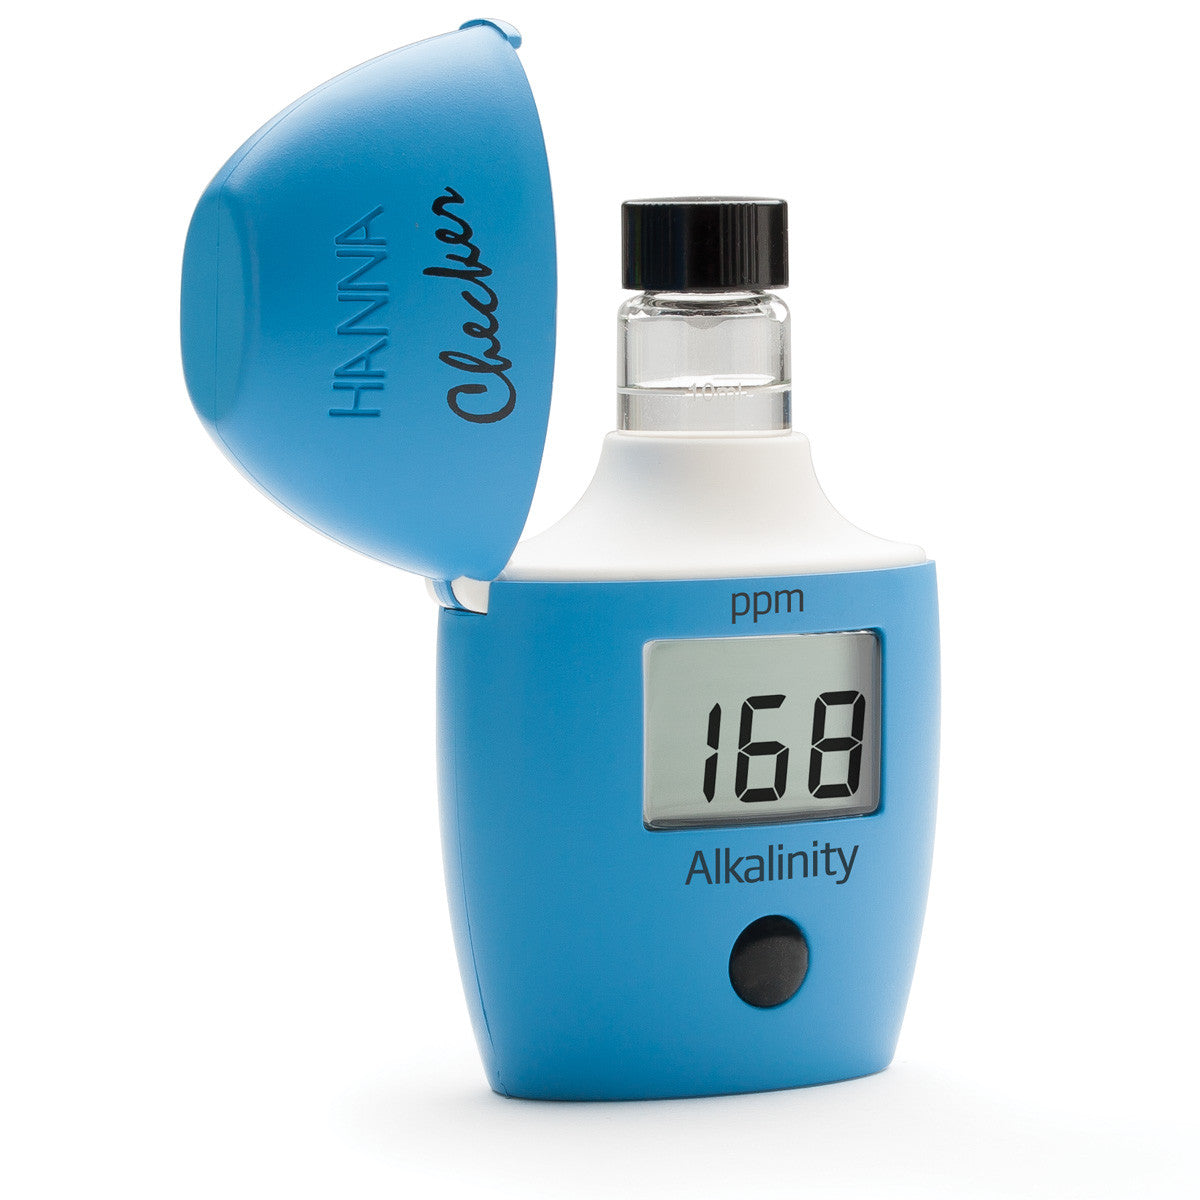 A blue bottle with a digital display on it, perfect for TAS Alkalinity Checker HC test kits.